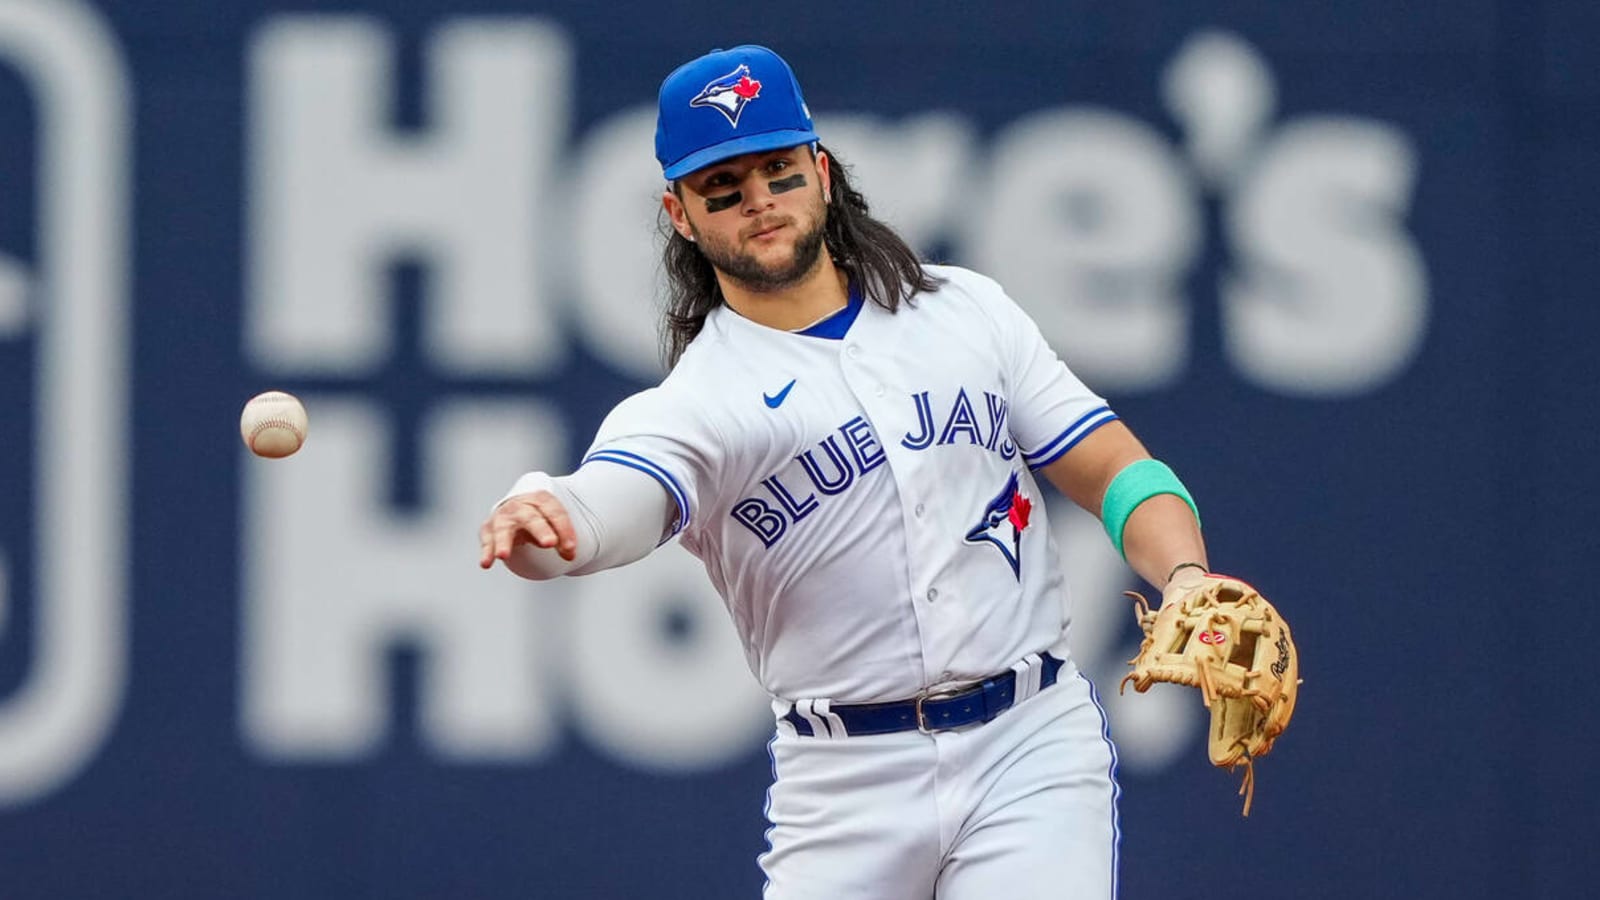 Injury to Blue Jays star could impact team's trade deadline plans